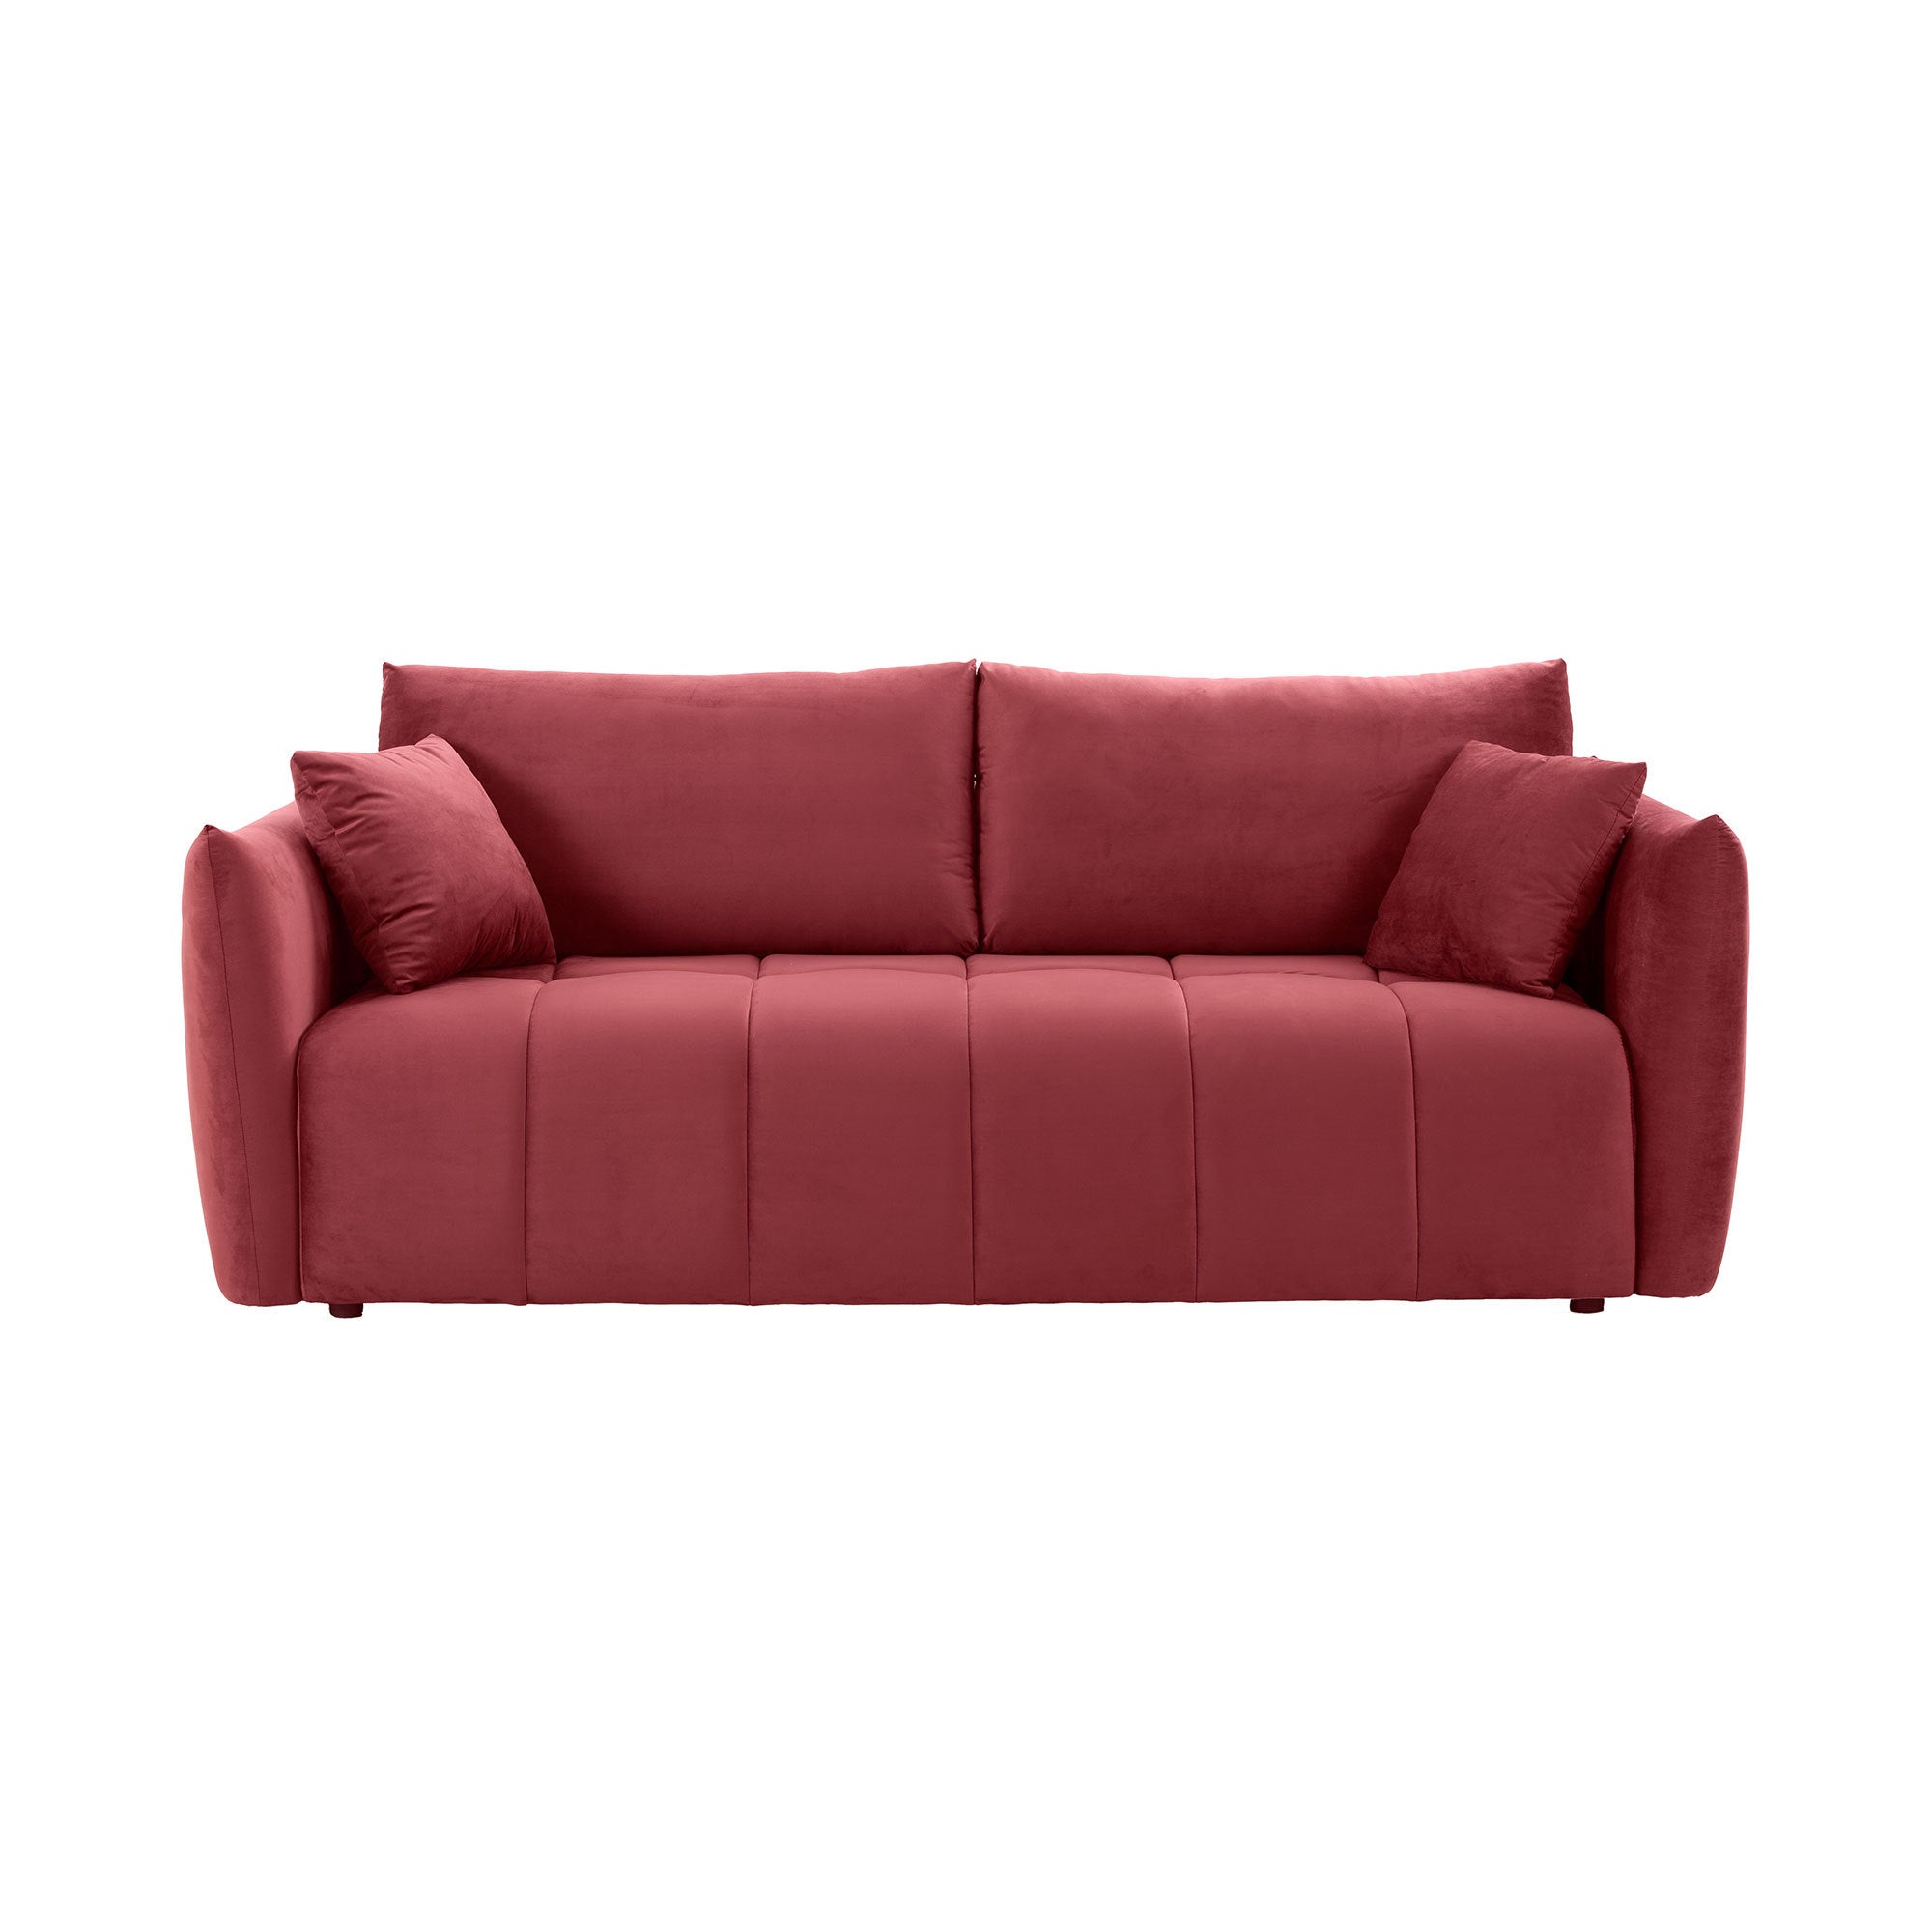 Sectional Sofa,3 seater sofa with 3 Pillows for Living red-fabric